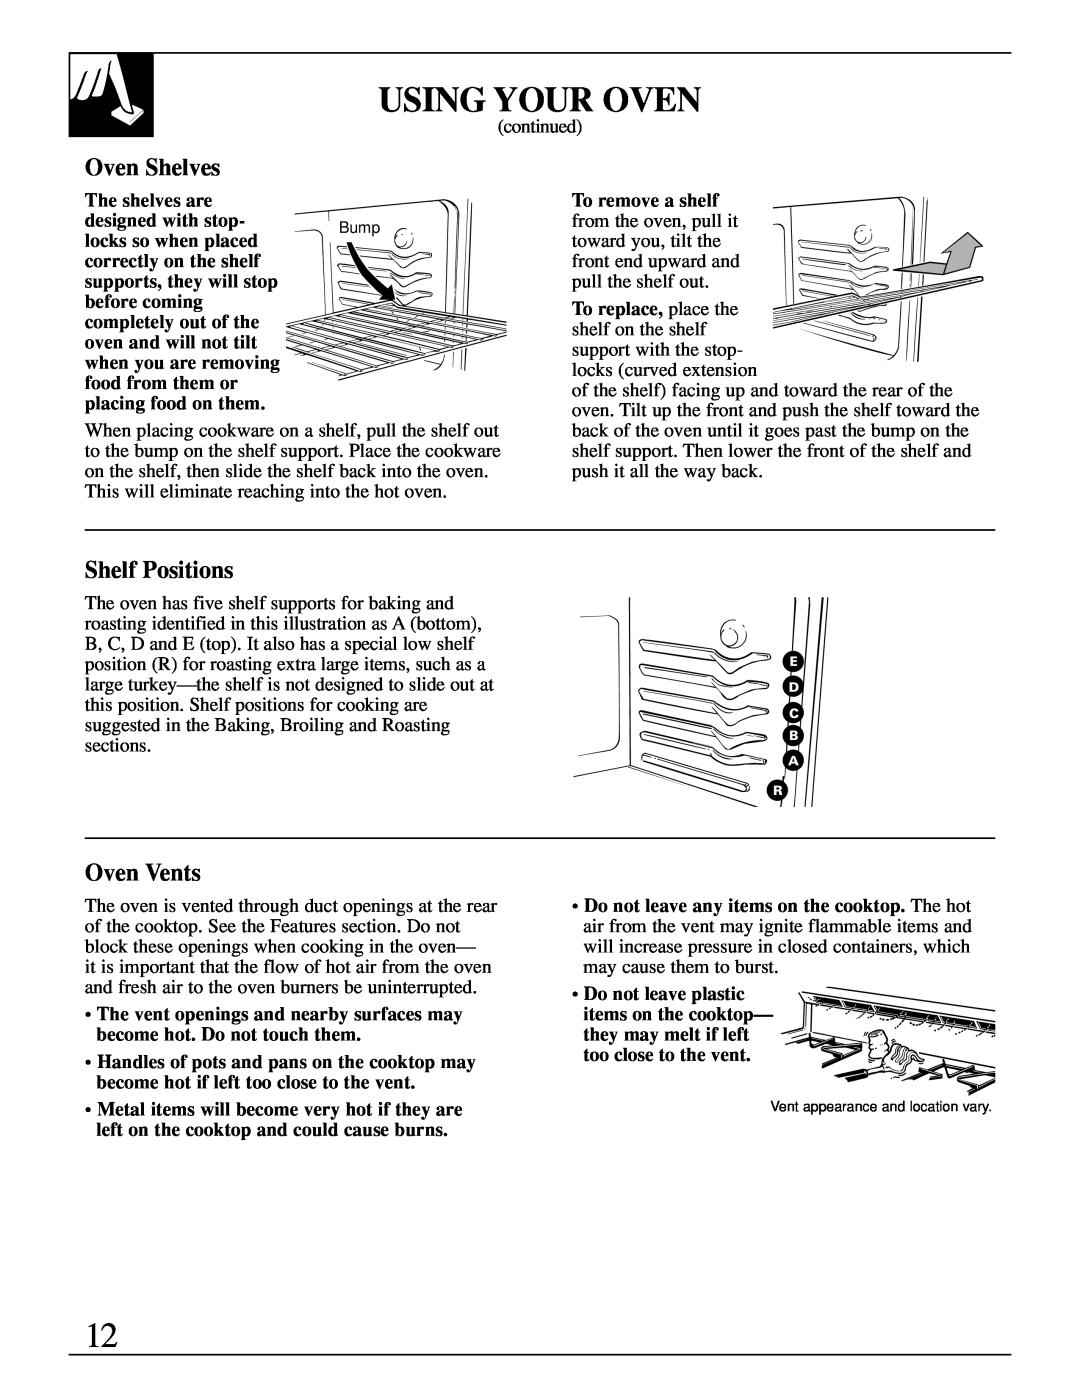 GE XL44 Oven Shelves, Shelf Positions, Oven Vents, Using Your Oven, The shelves are, designed with stop, before coming 